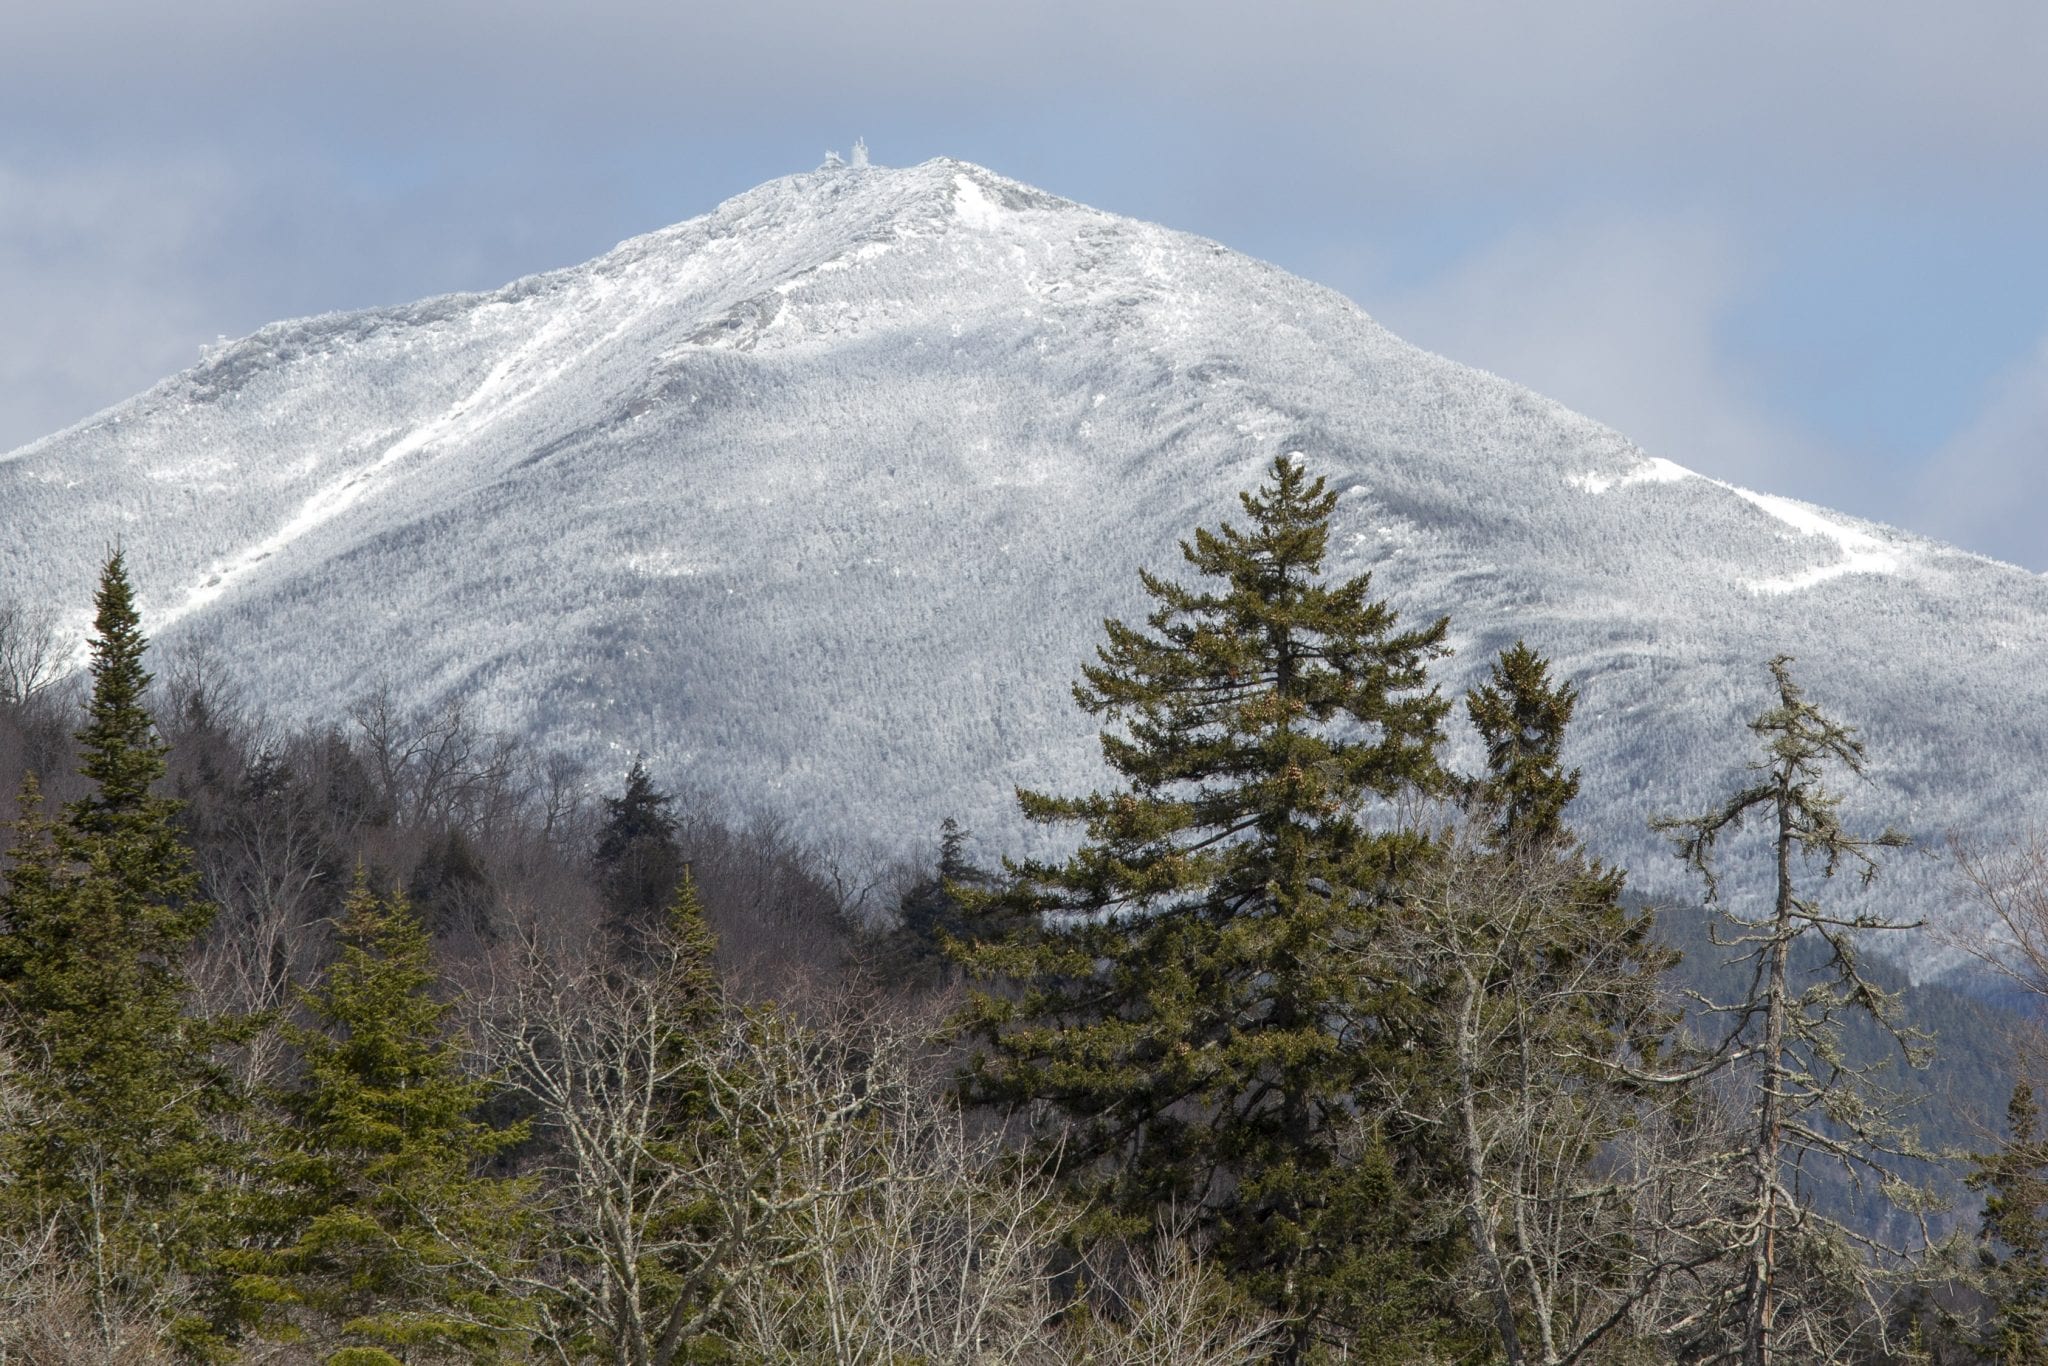 The summit of Whiteface Mountain. Explorer file photo by Mike Lynch